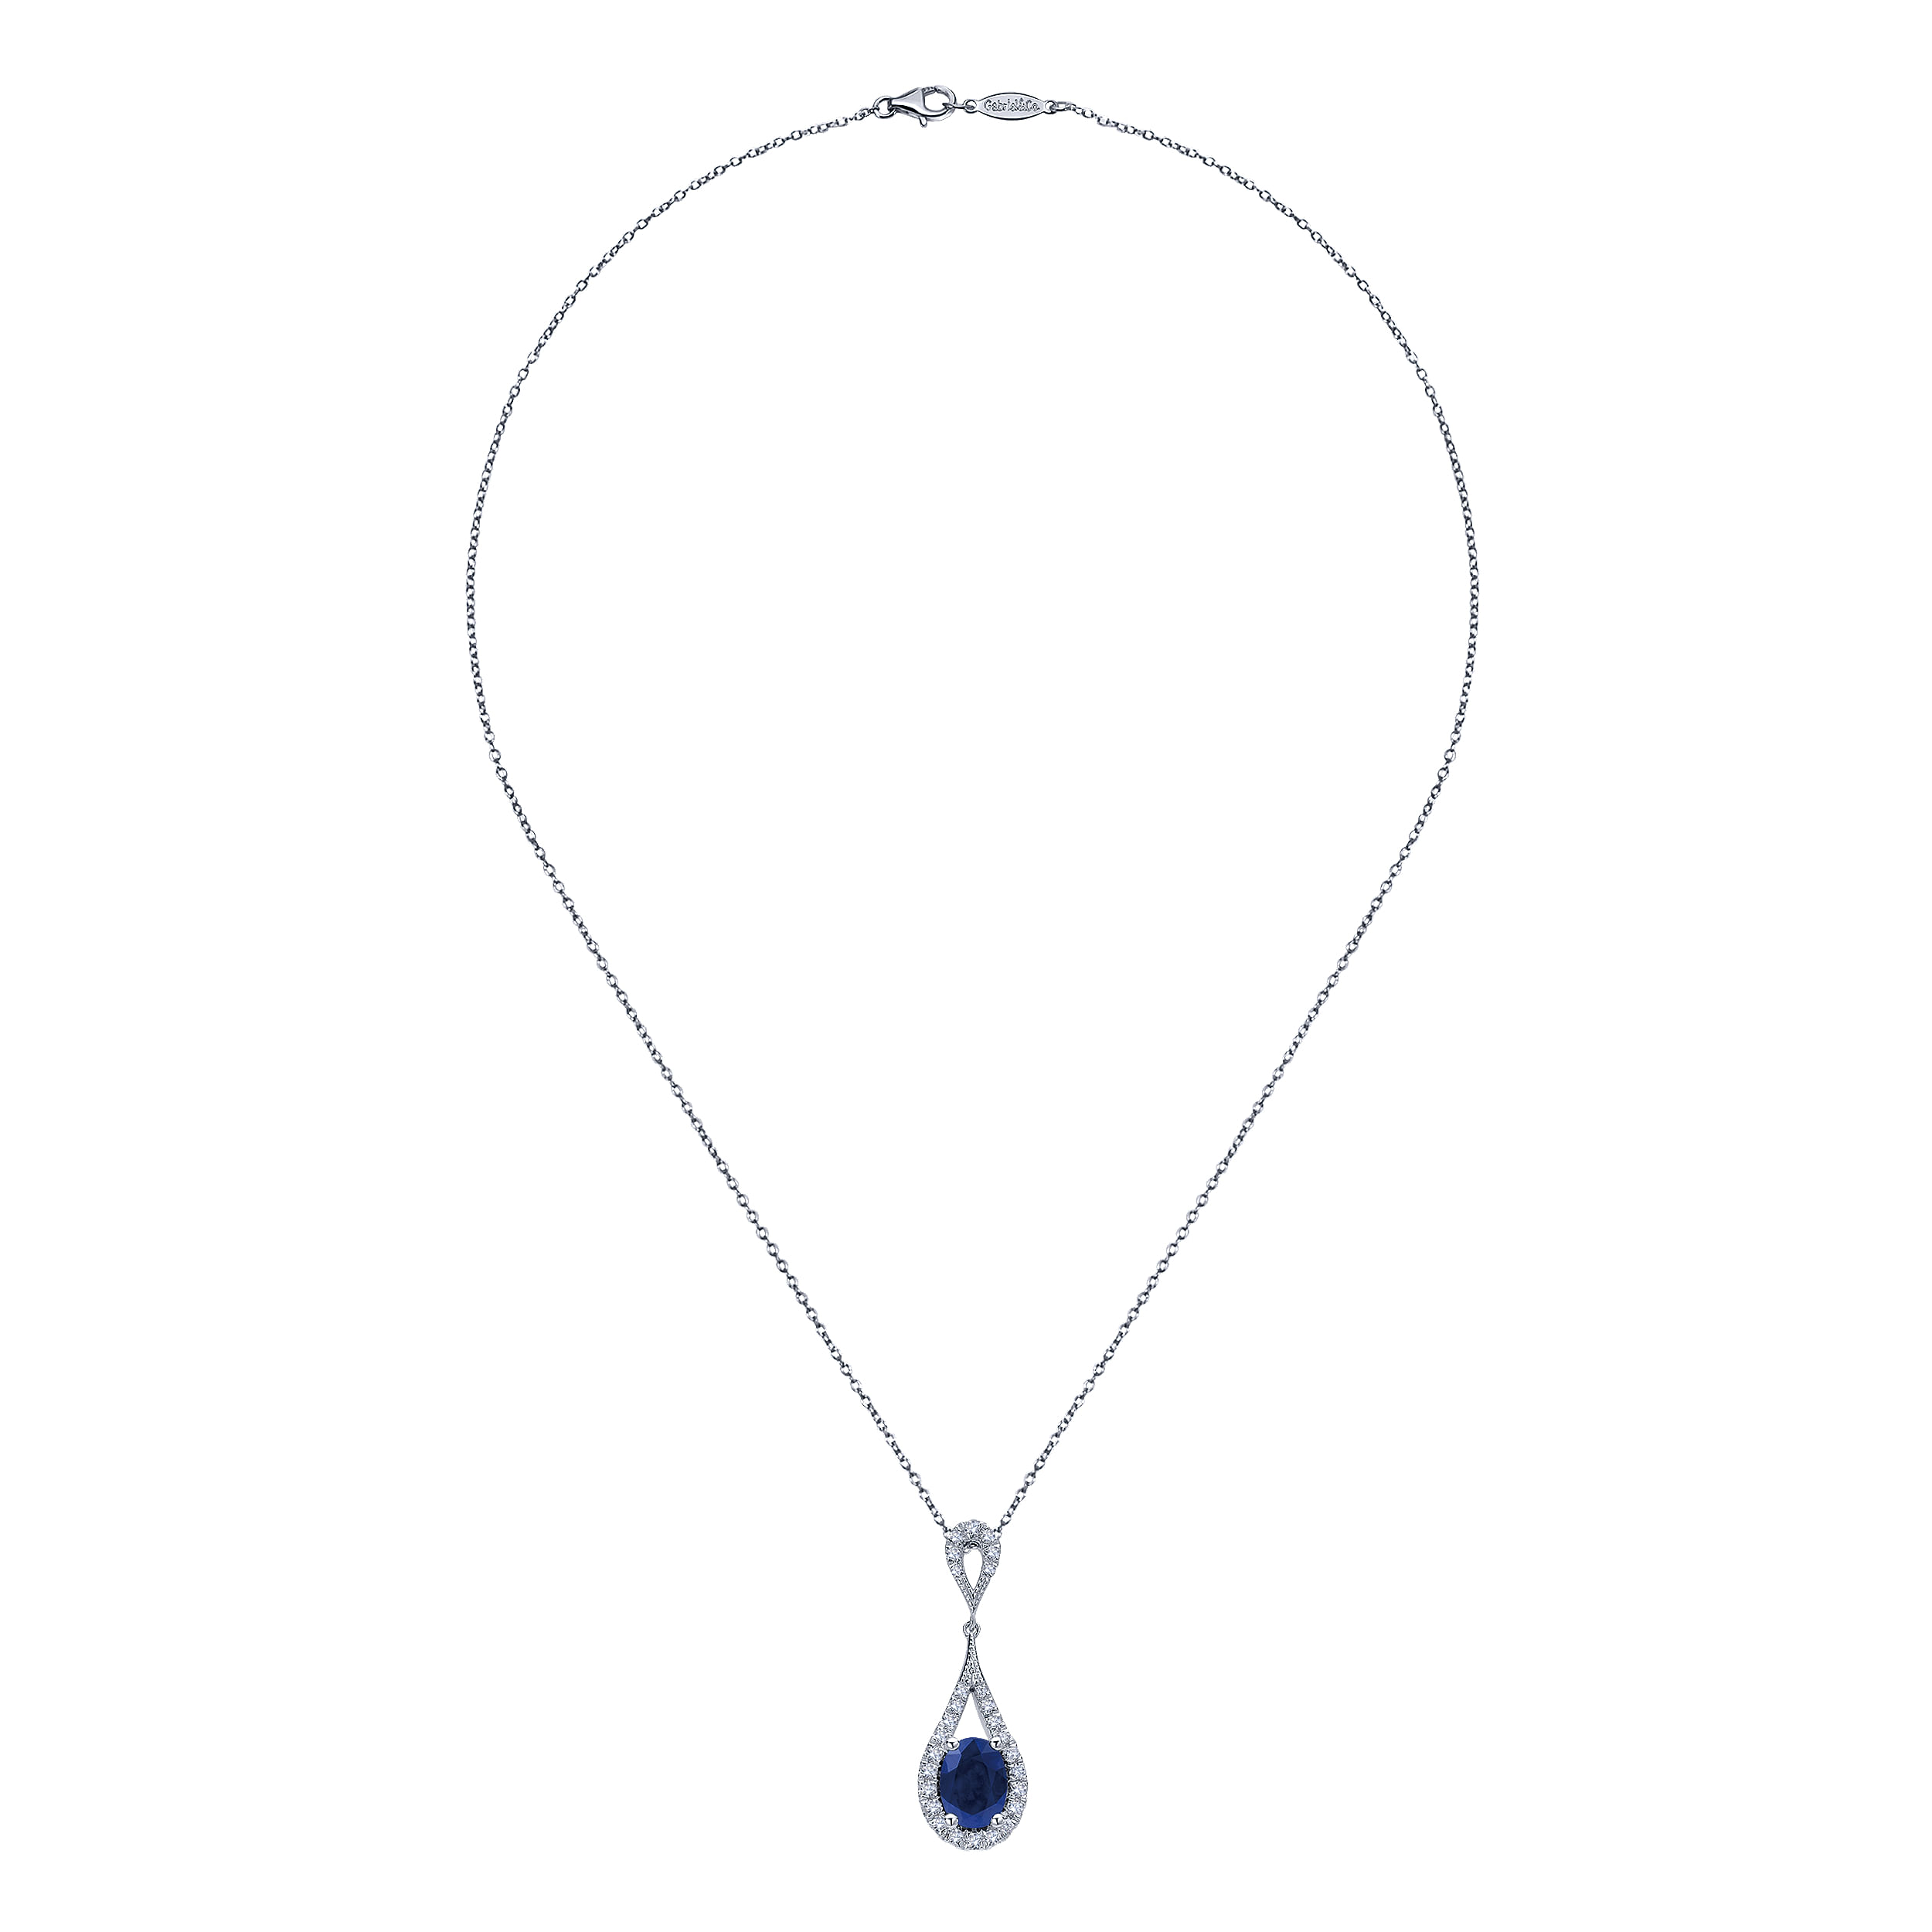 14K White Gold Long Oval Sapphire and Diamond Pendant Necklace